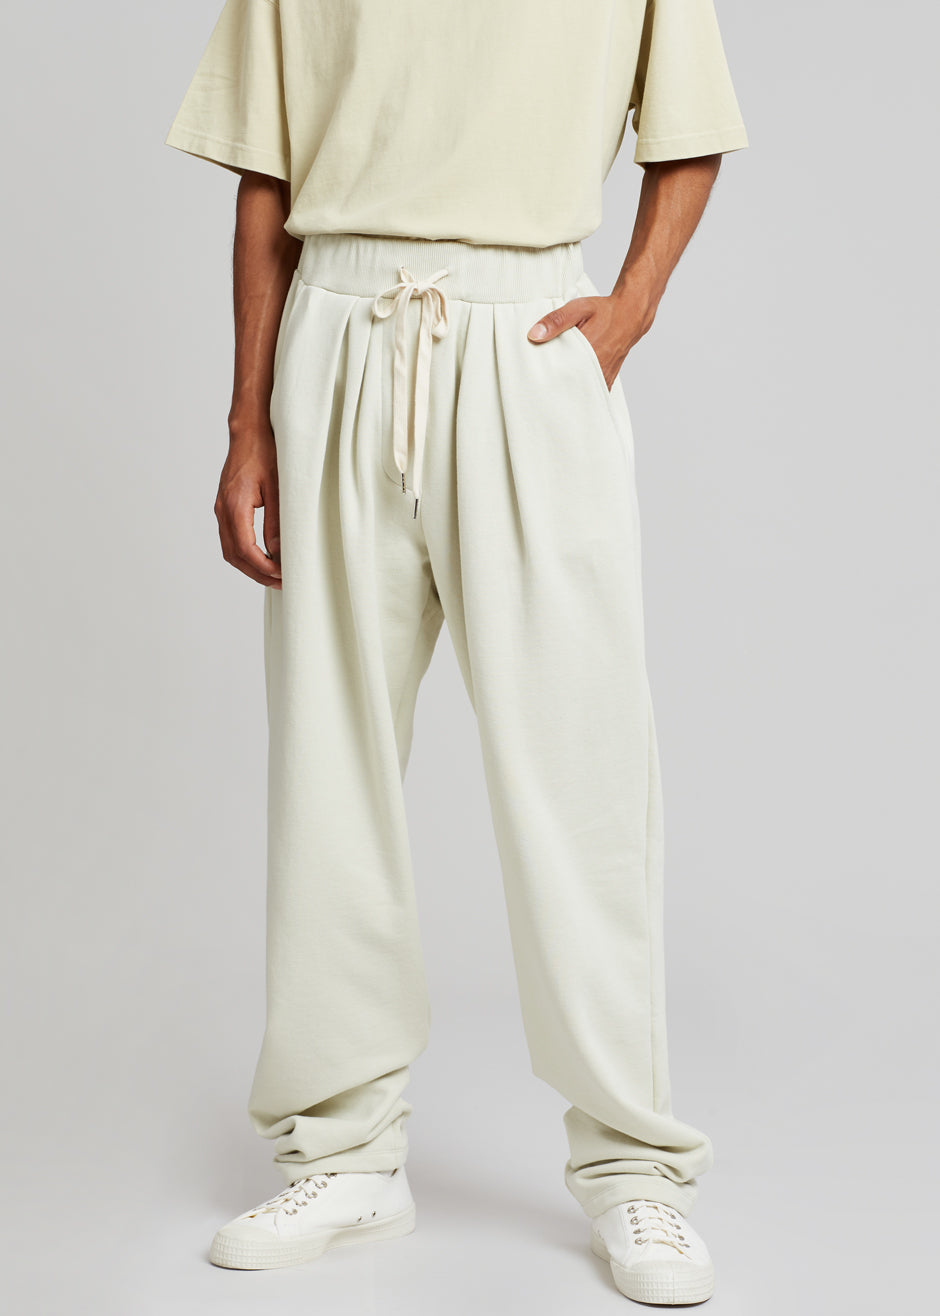 Frankie Shop Pleated Cotton and Linen Pants